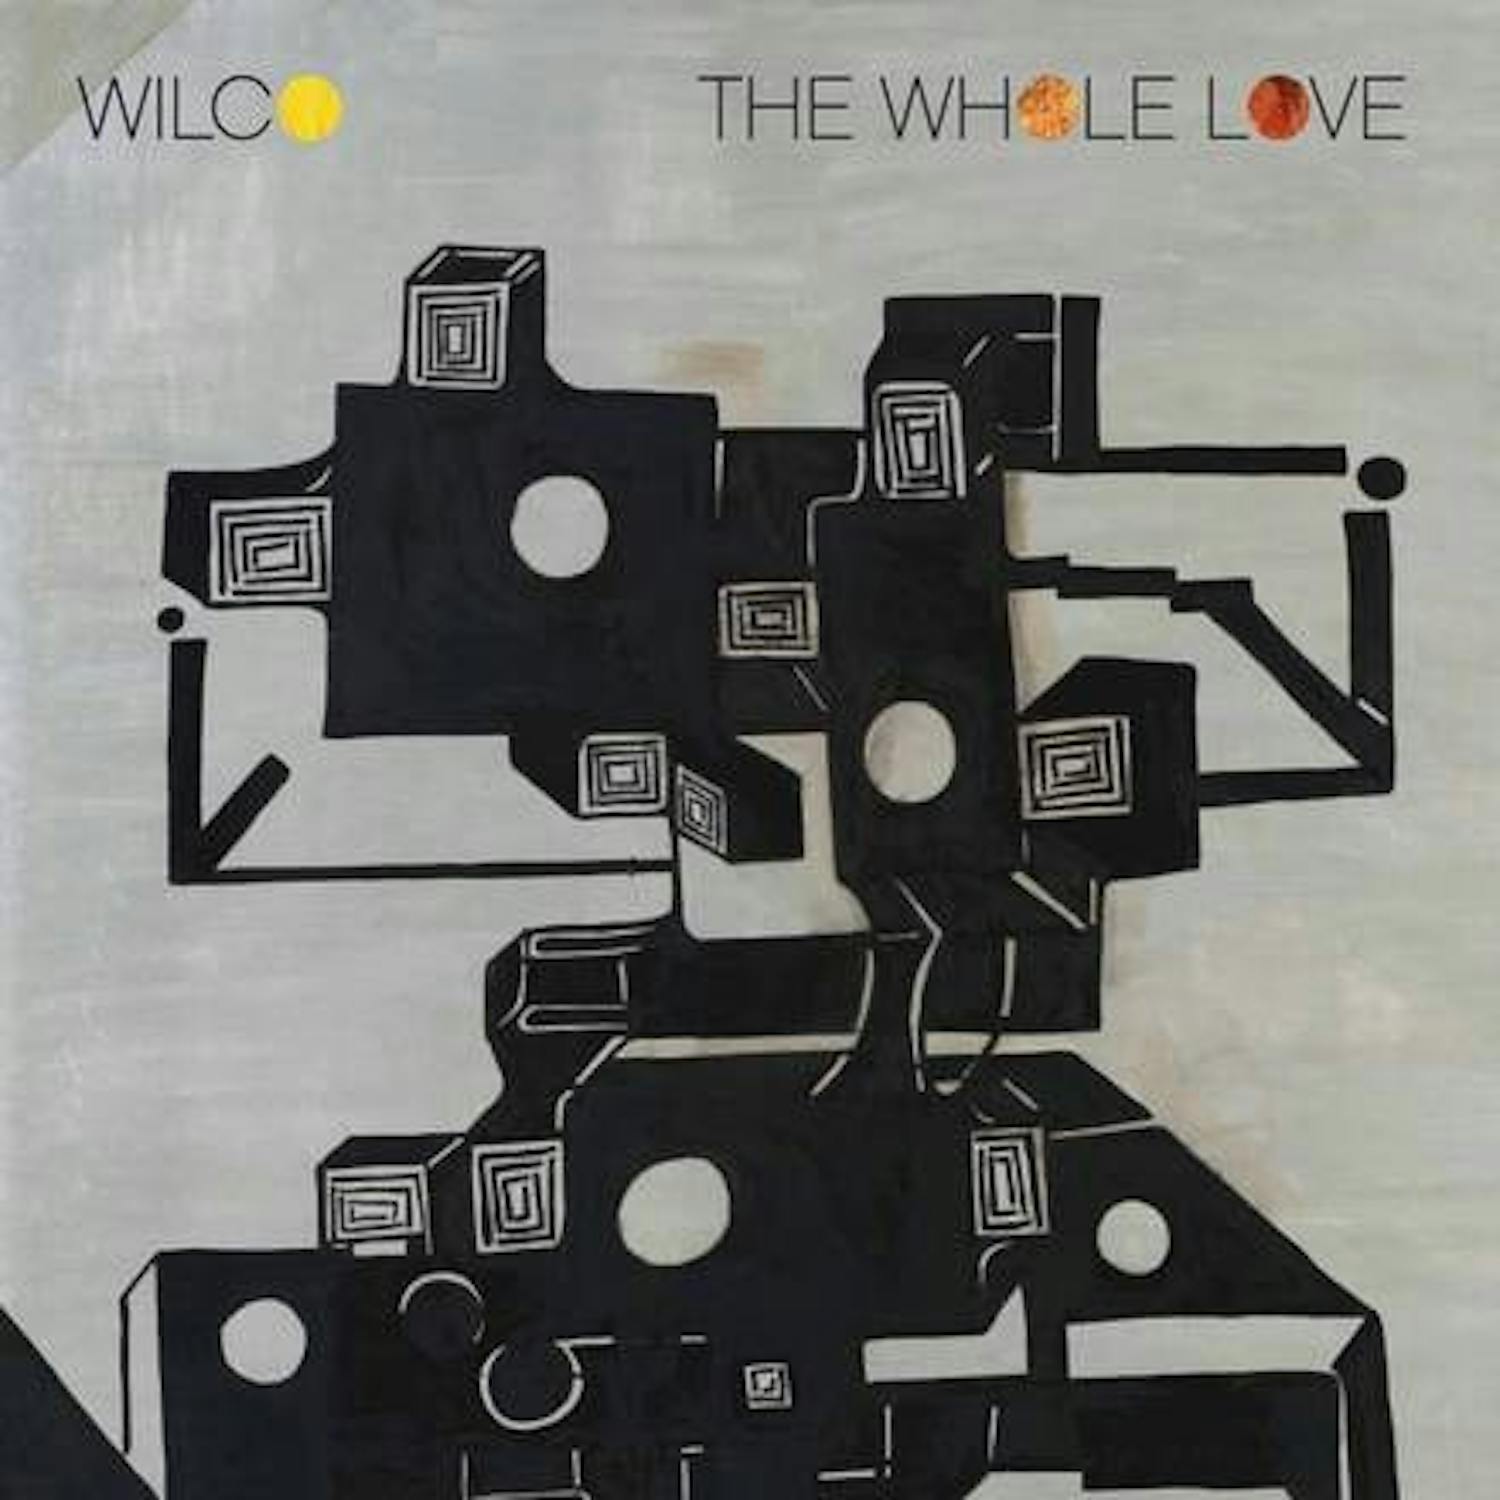 Wilco returns Sept. 27 with 